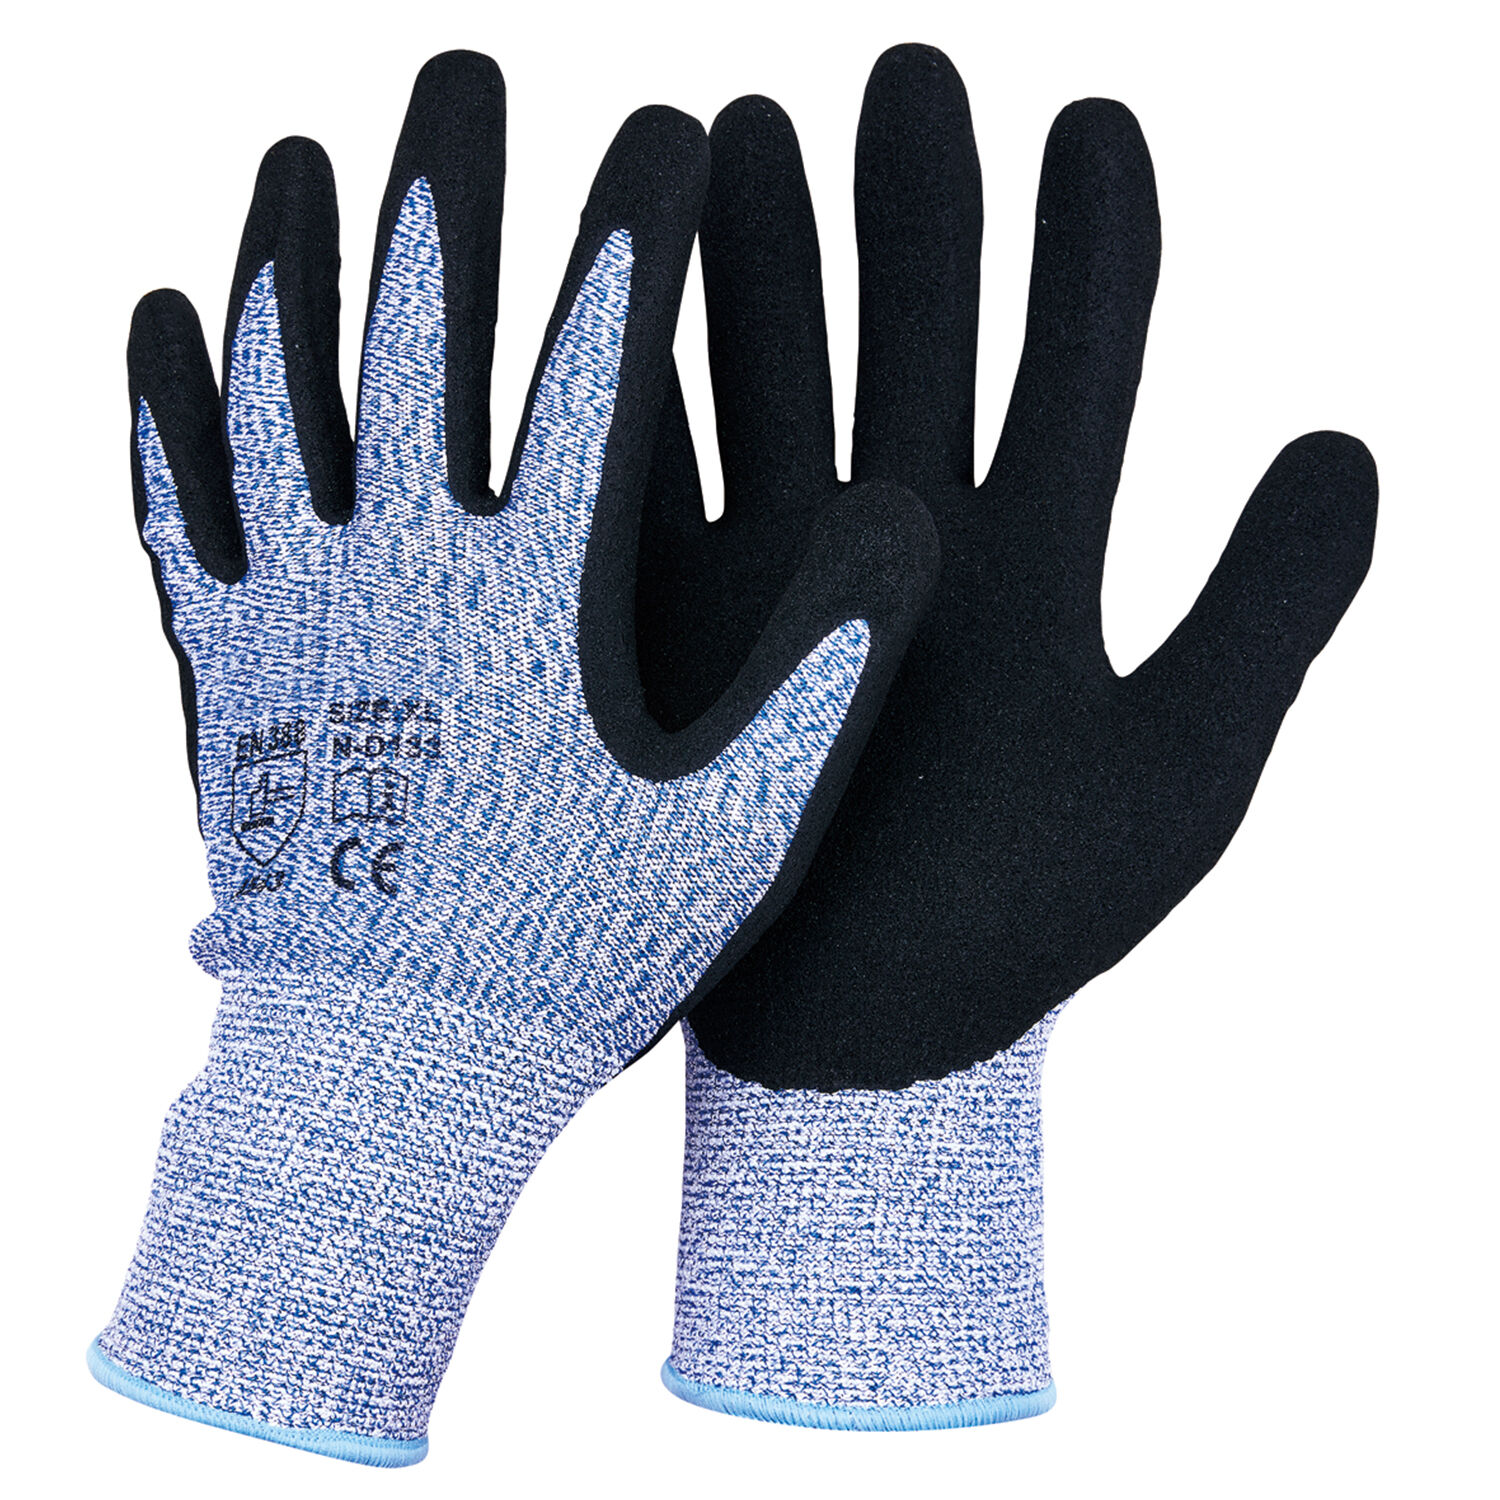 N-d133 Hppe Nitrile Coated Cut Resistant Safety Work Gloves Level 5 Anti  Cut Gloves For Construction - Buy China Wholesale Cut Resistant Gloves  $1.42